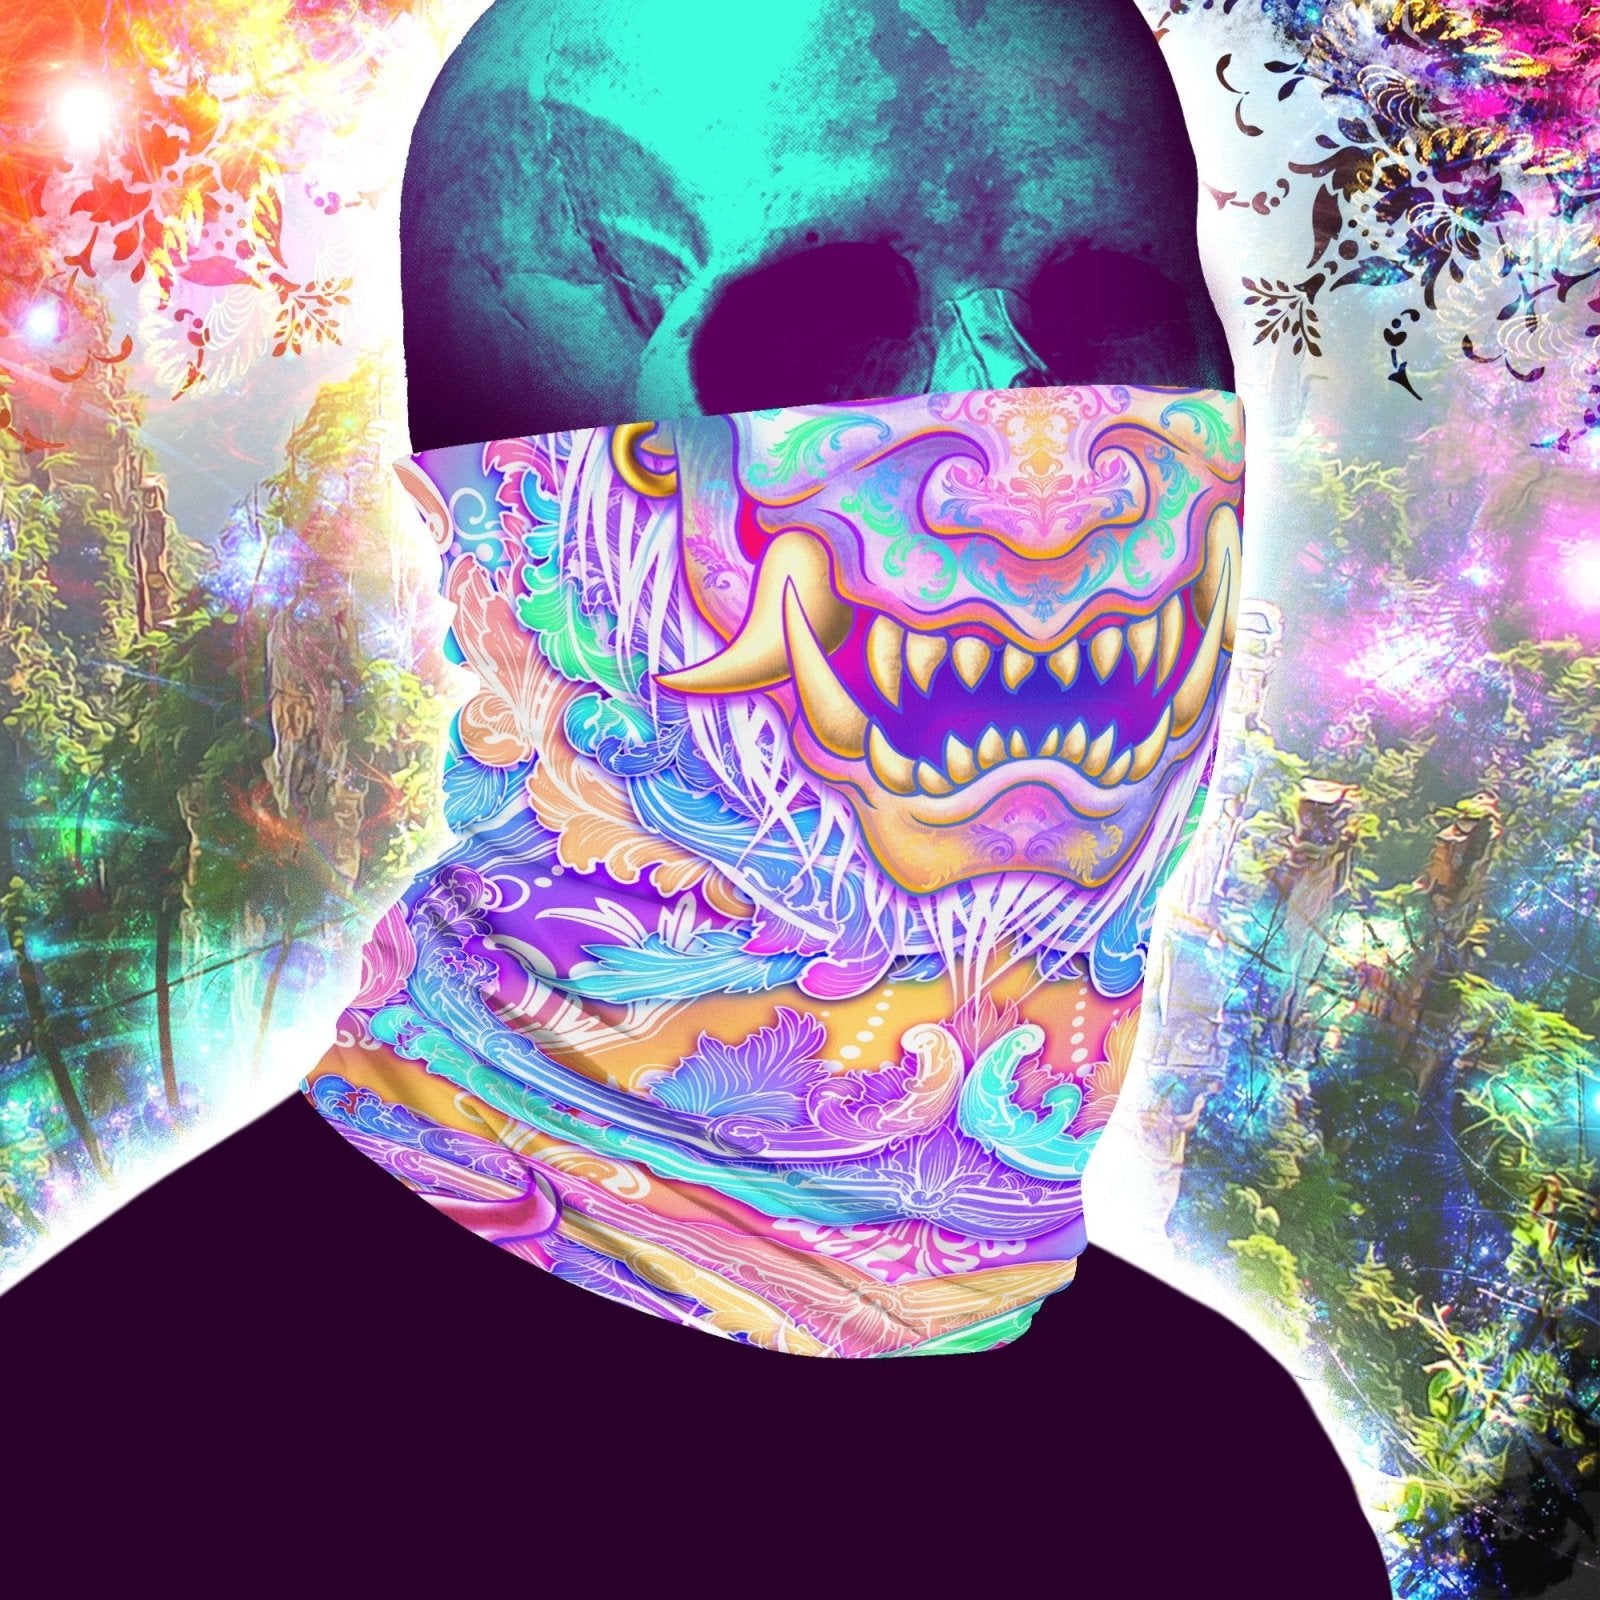 Aesthetic Neck Gaiter, Face Mask, Head Covering, Rave Outfit, Japanese Oni, Fangs, Horns Headband - Psychedelic Pastel Oni - Abysm Internal